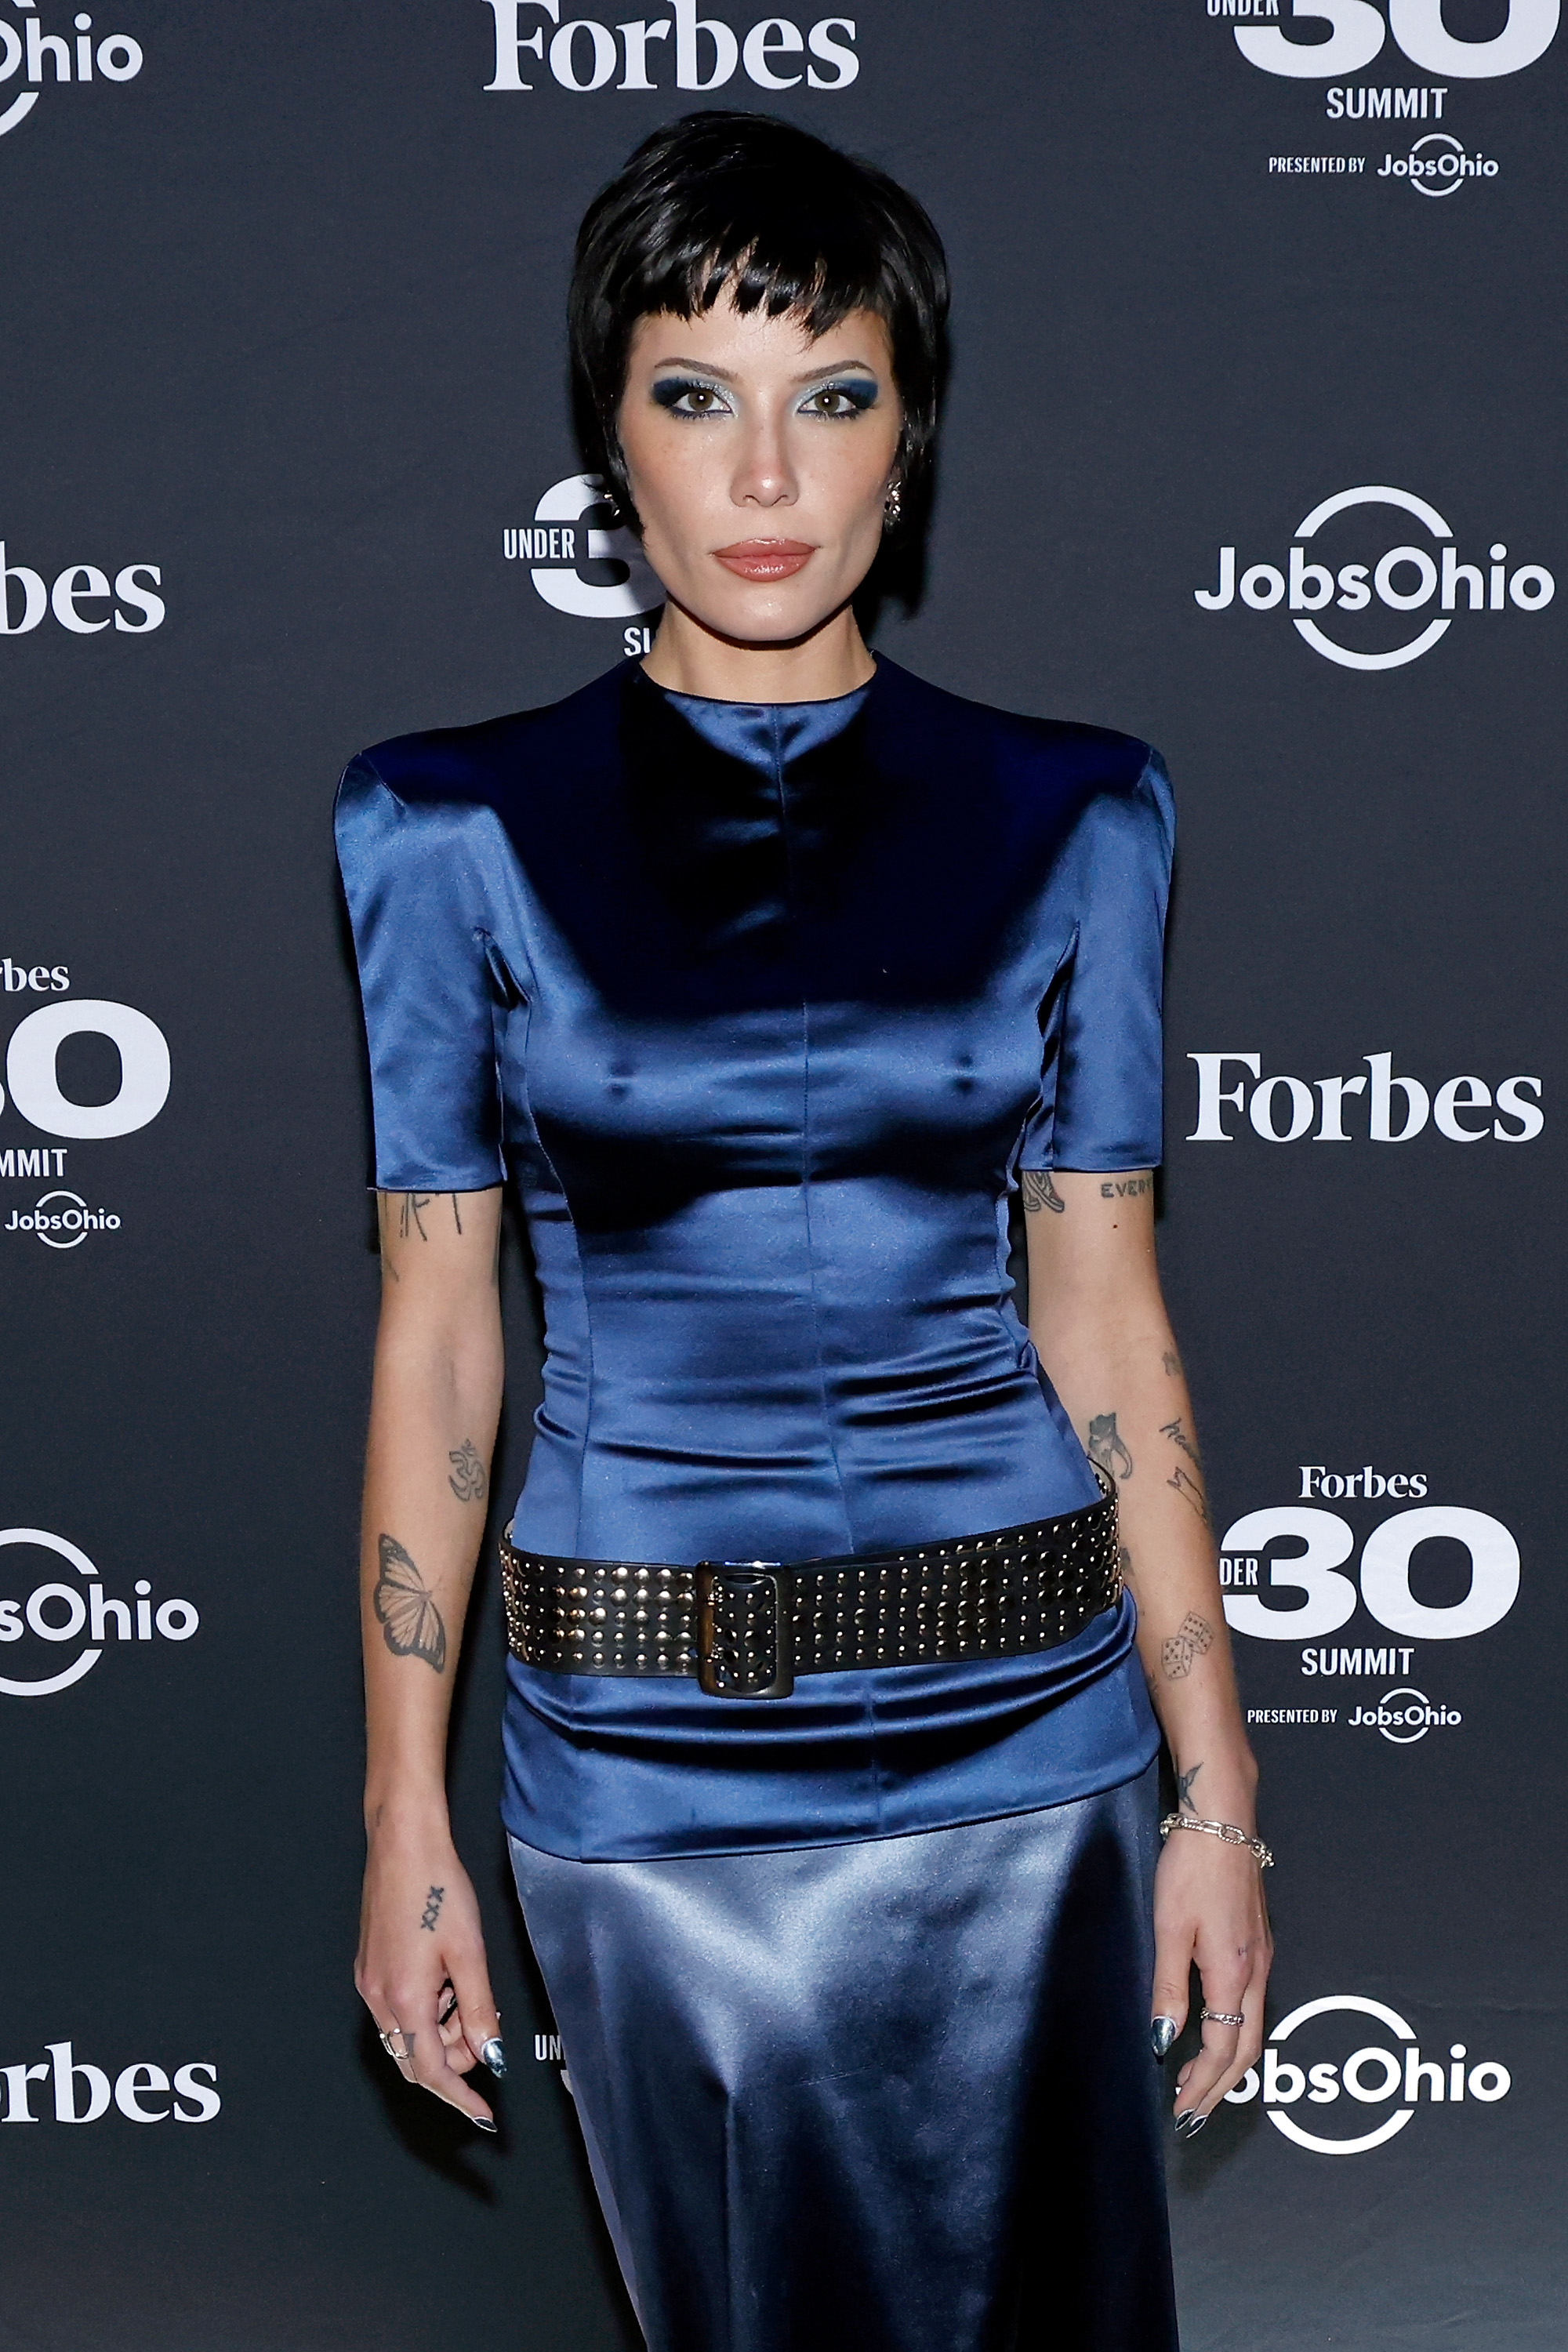 Close-up of Halsey in a satiny outfit at a media event